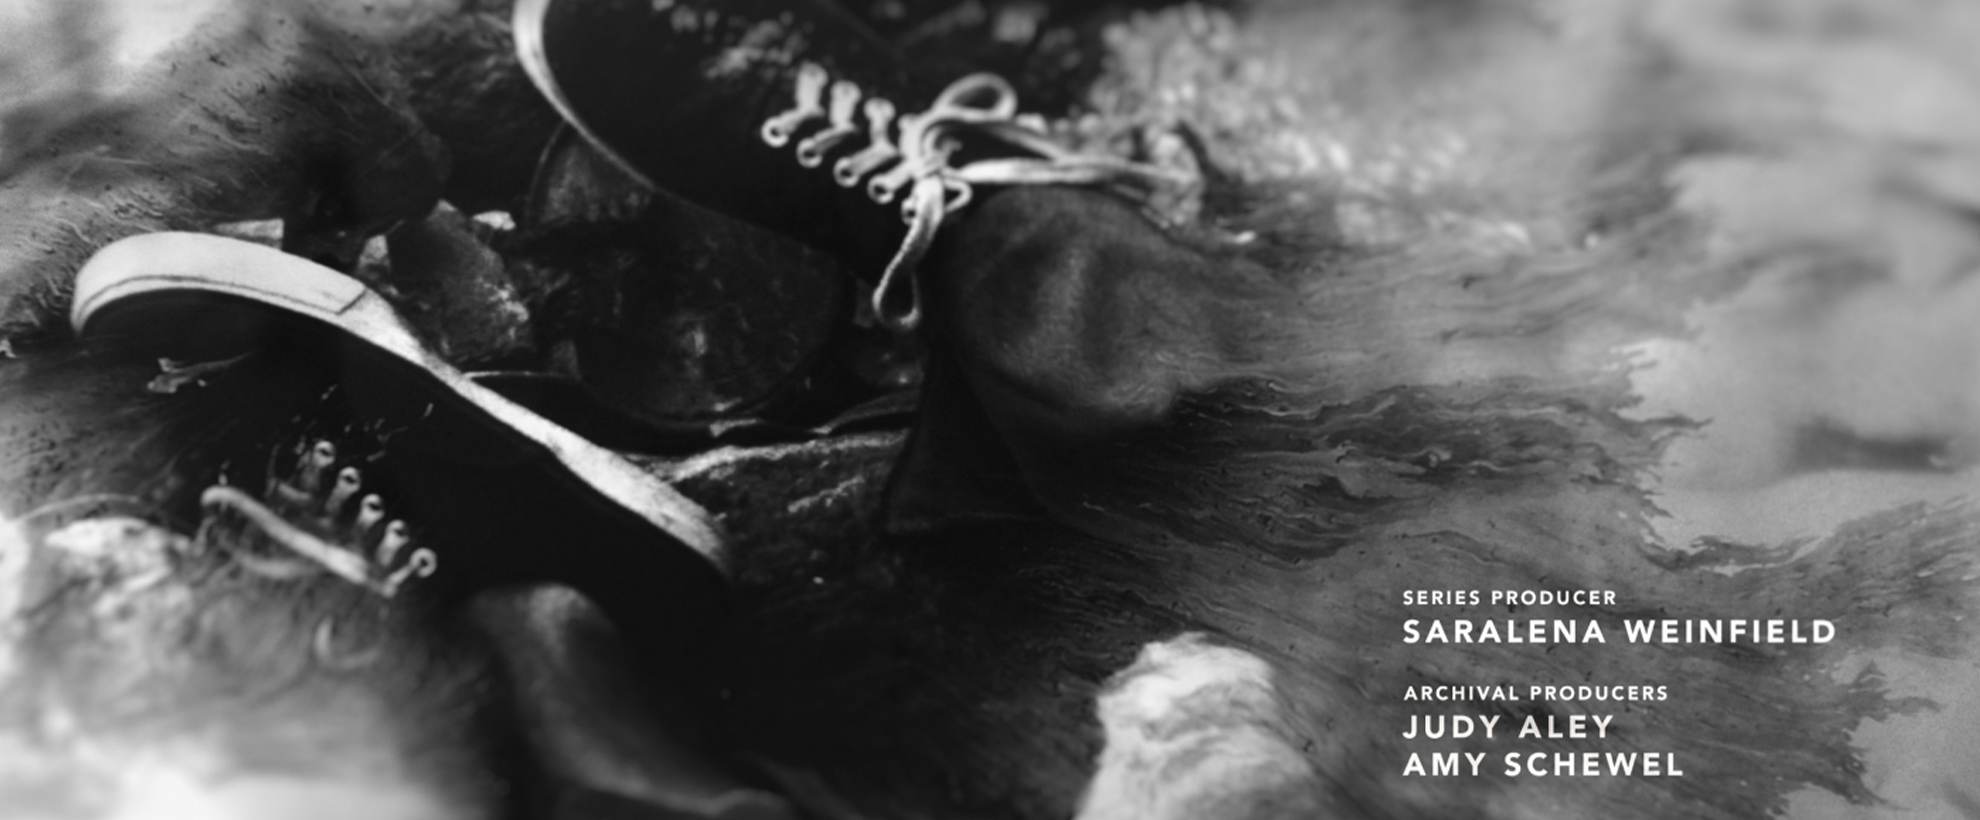 A frame from the titles of Atlanta's Missing and Murdered, black and white shot of laced shoes